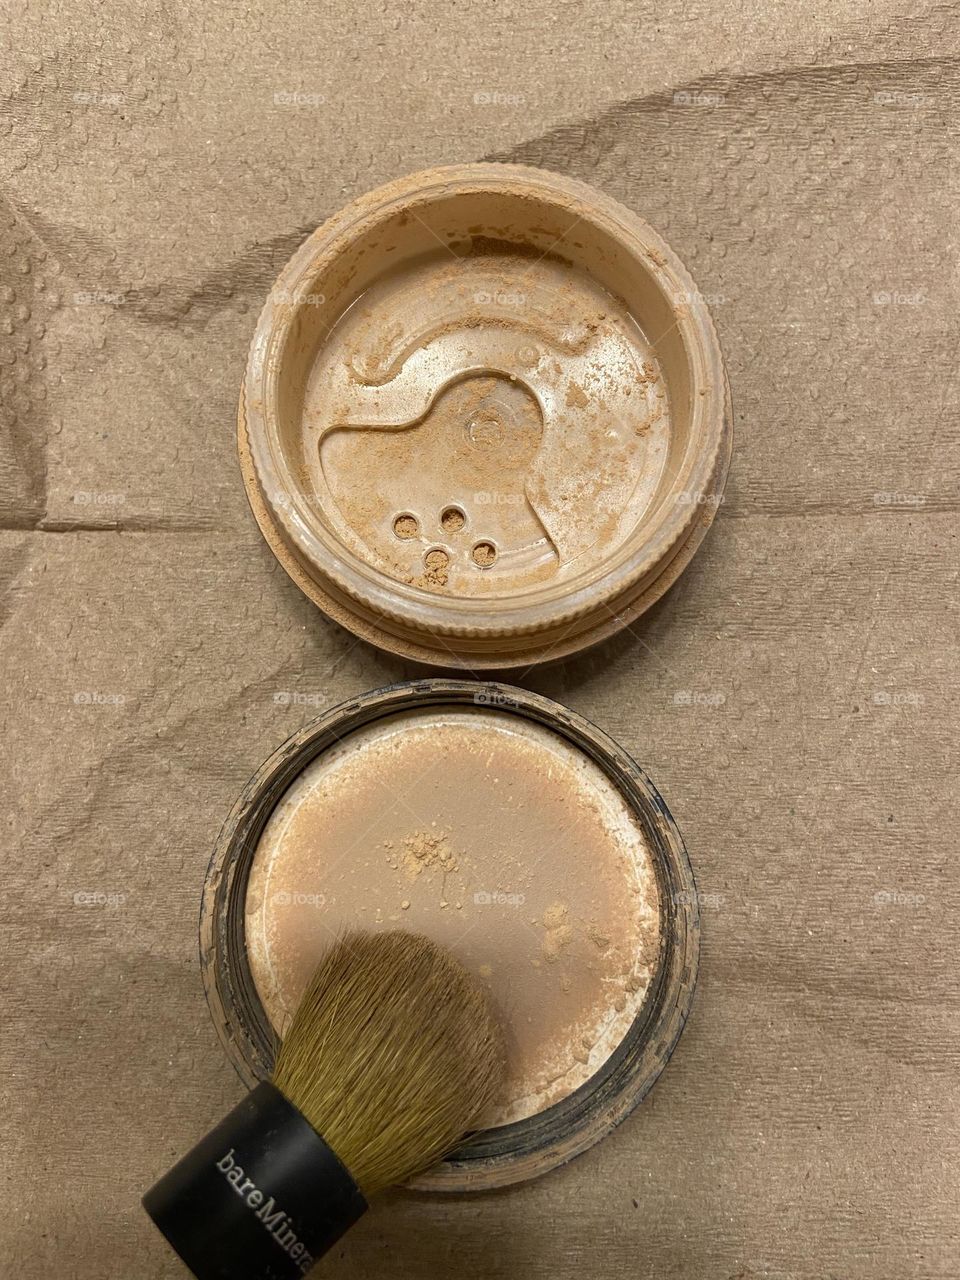 I use different beauty products, but I always go back to Bare Minerals Original Foundation or Matte Foundation. This is Matte Foundation in Light Beige. It looks natural on and not like you are wearing makeup. 